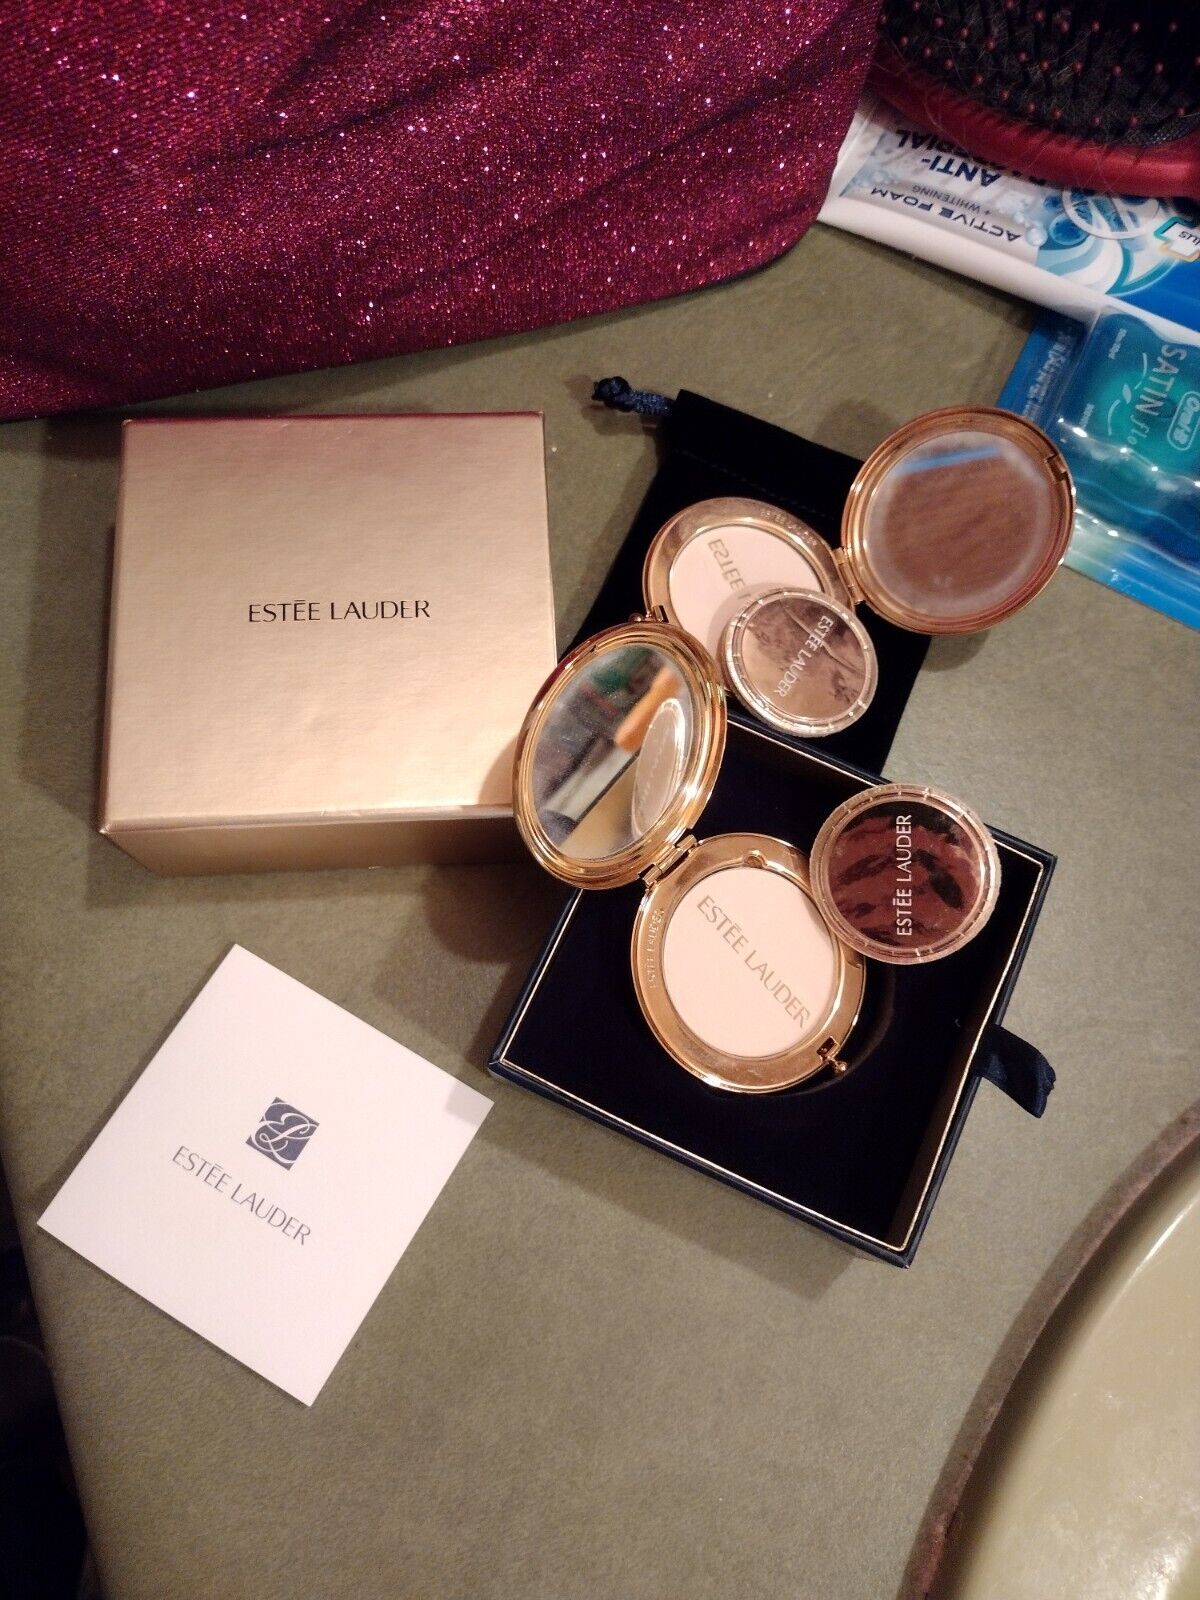 2 Estee Lauder powder compacts For One Price 